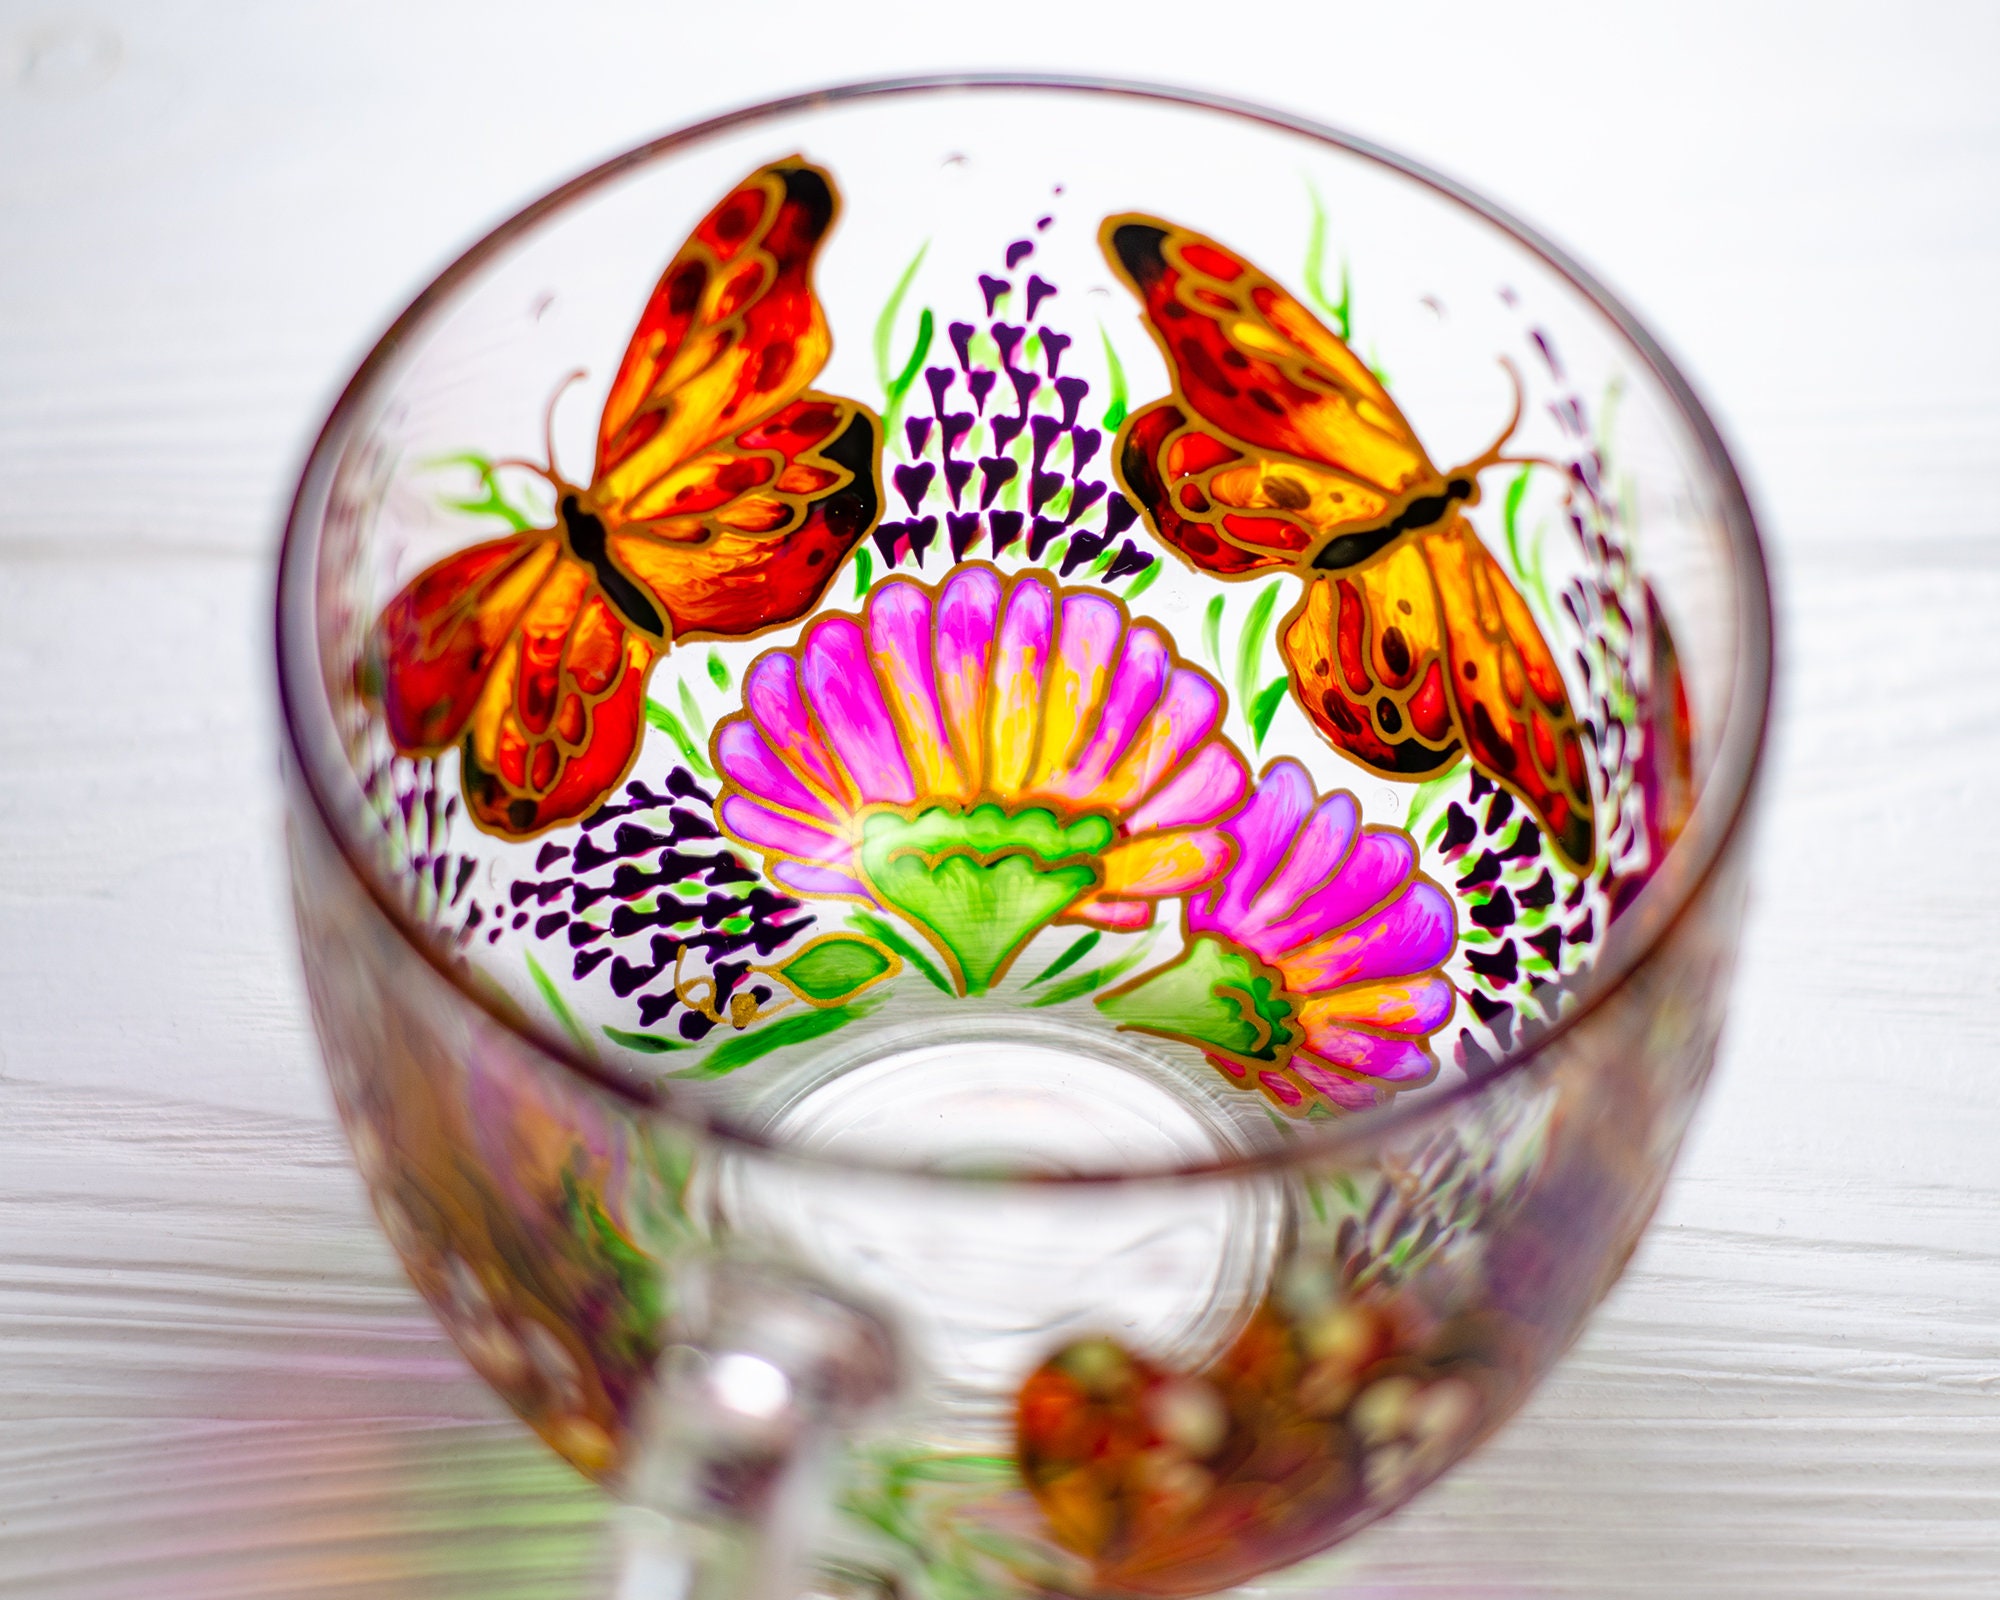 Hand Painted Orange Butterfly Mug Stained Glass Cup Decor Transparent Glass  Inspirational Personalized Mug Cool Floral Coffee Mugs 